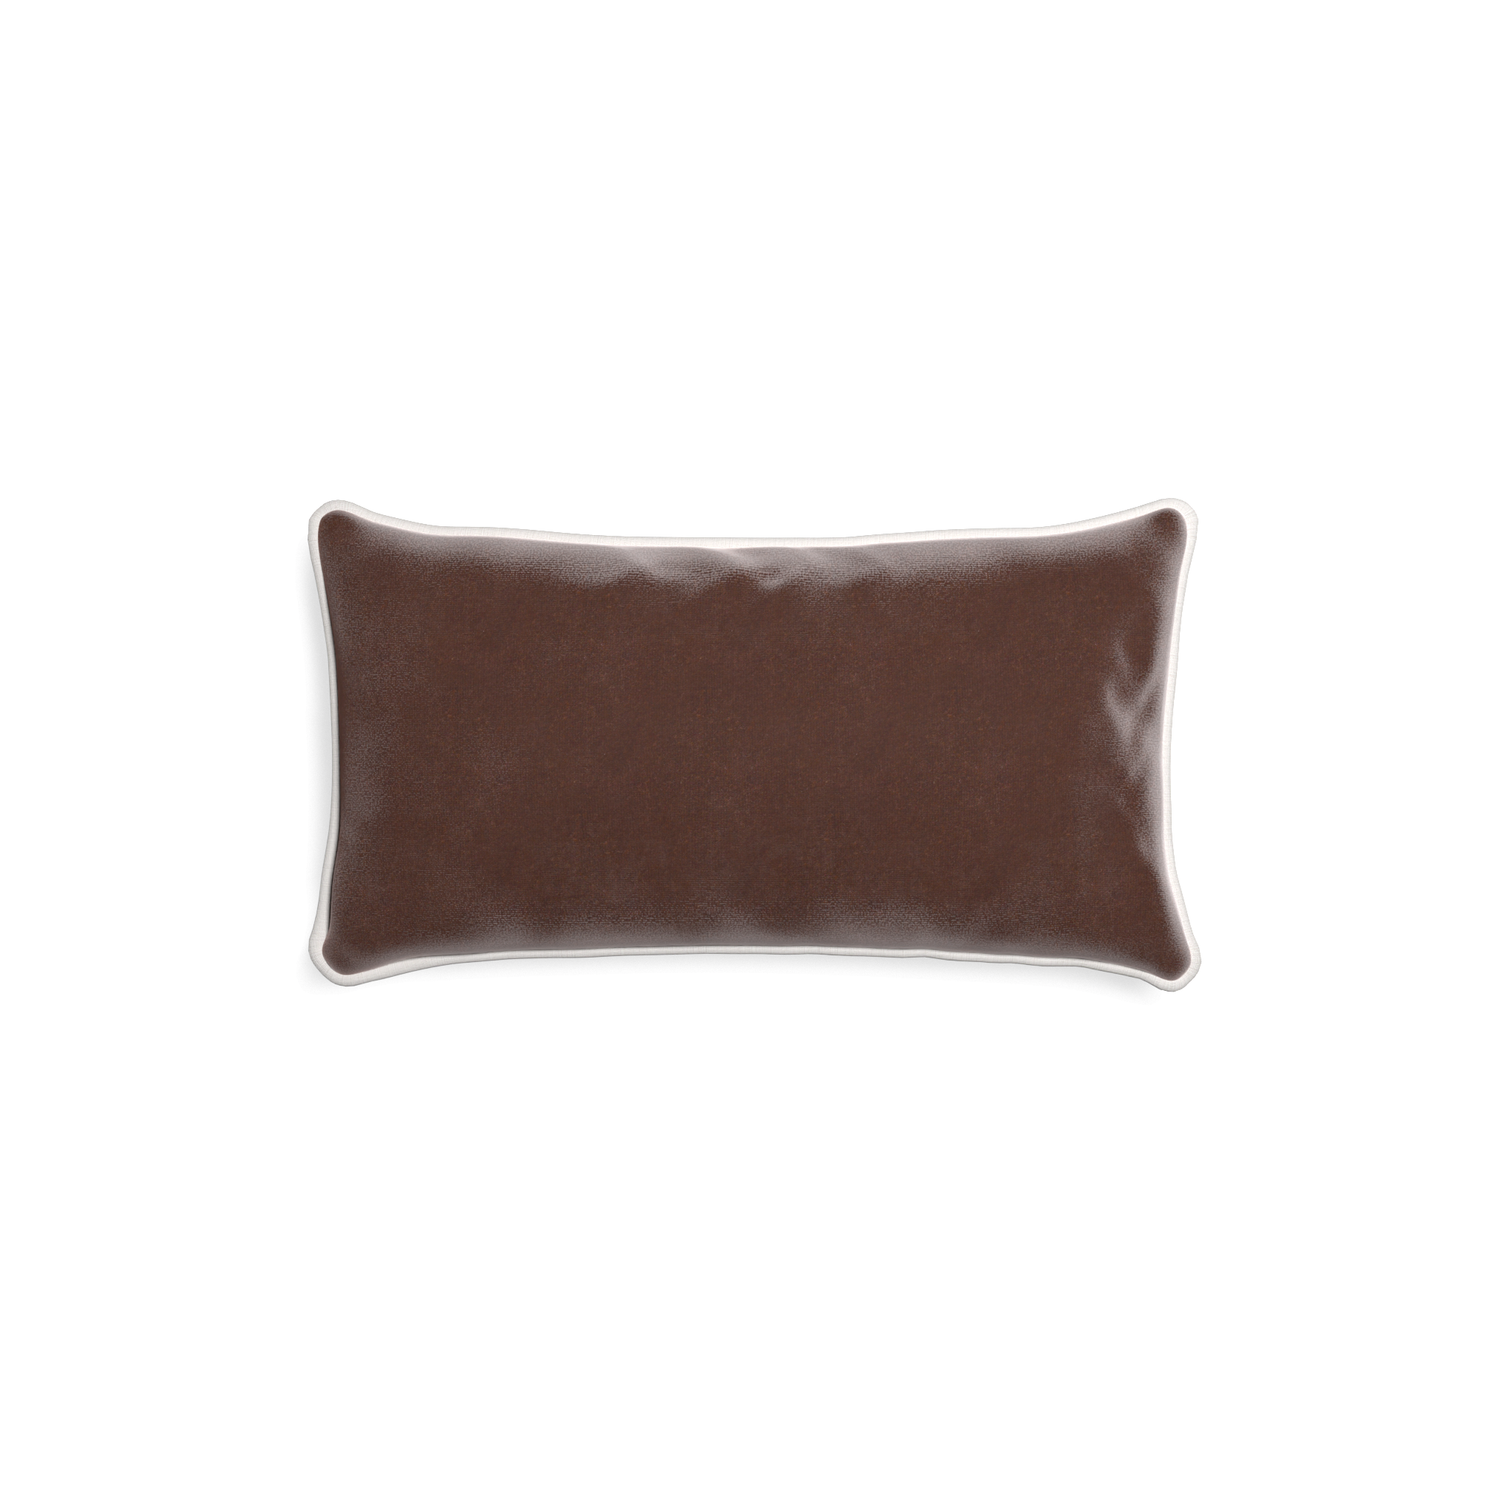 rectangle brown velvet pillow with white piping